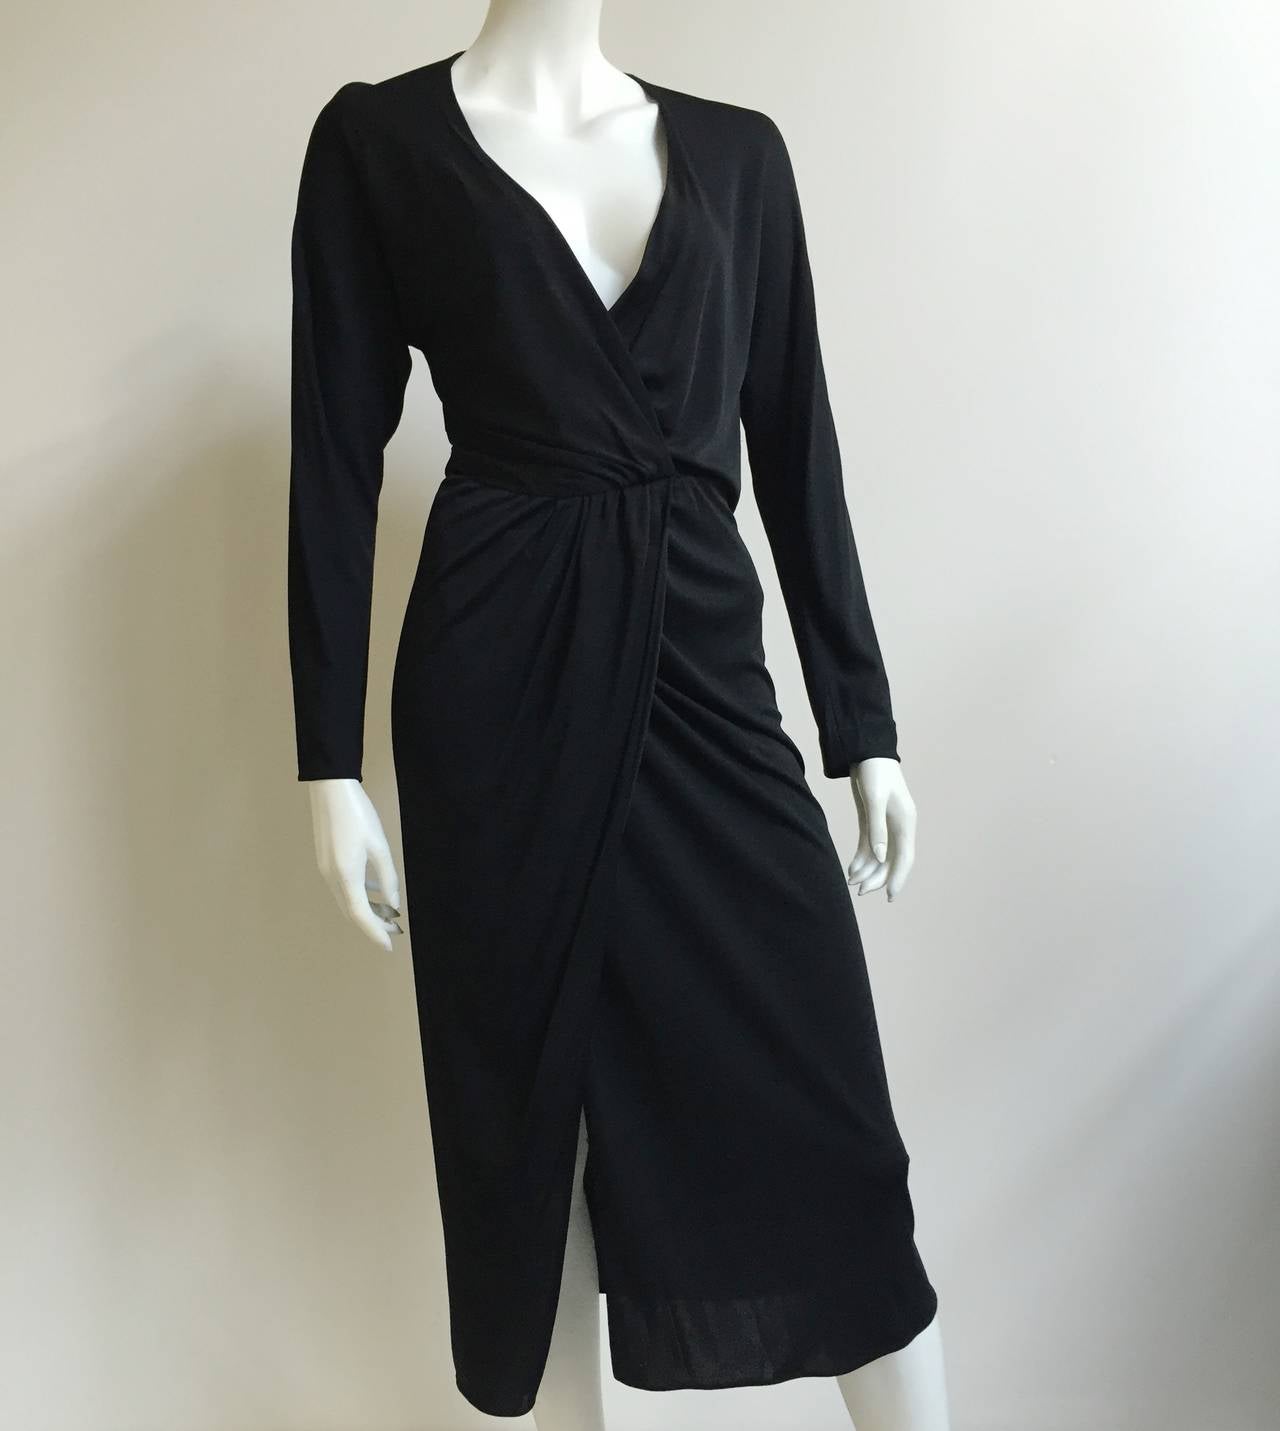 Halston 1970s black jersey wrap disco dress size 4 ( please see & use measurements). There are two hooks and one snap button that keeps wrap dress in place. The plunging neckline is very loose & very revealing just as Halston designed it. This is a